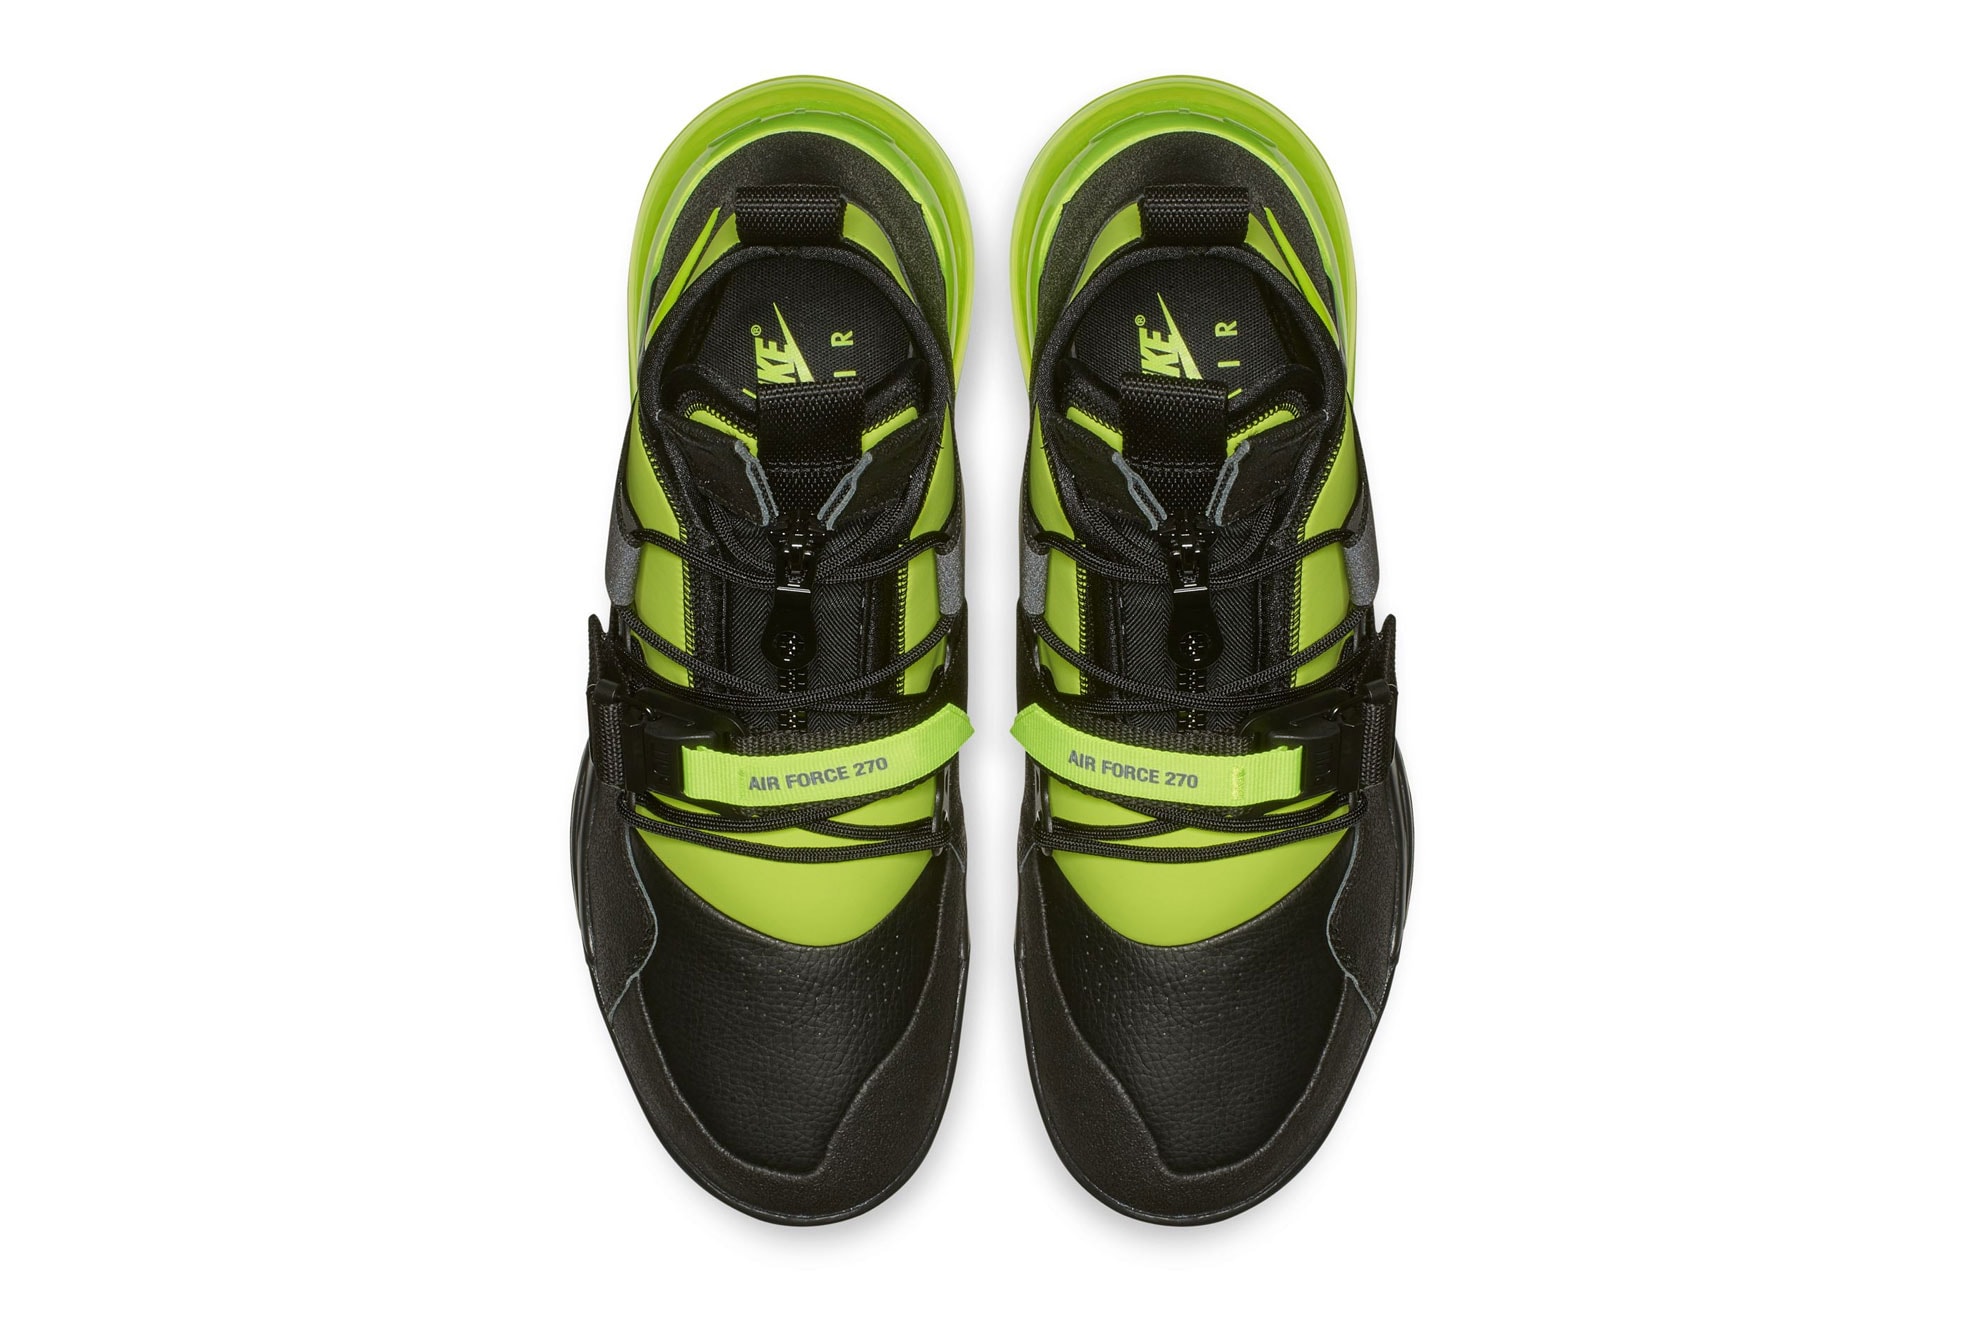  Nike Air Force 270 Utility "Volt" Release Date  leather neoprene neon green